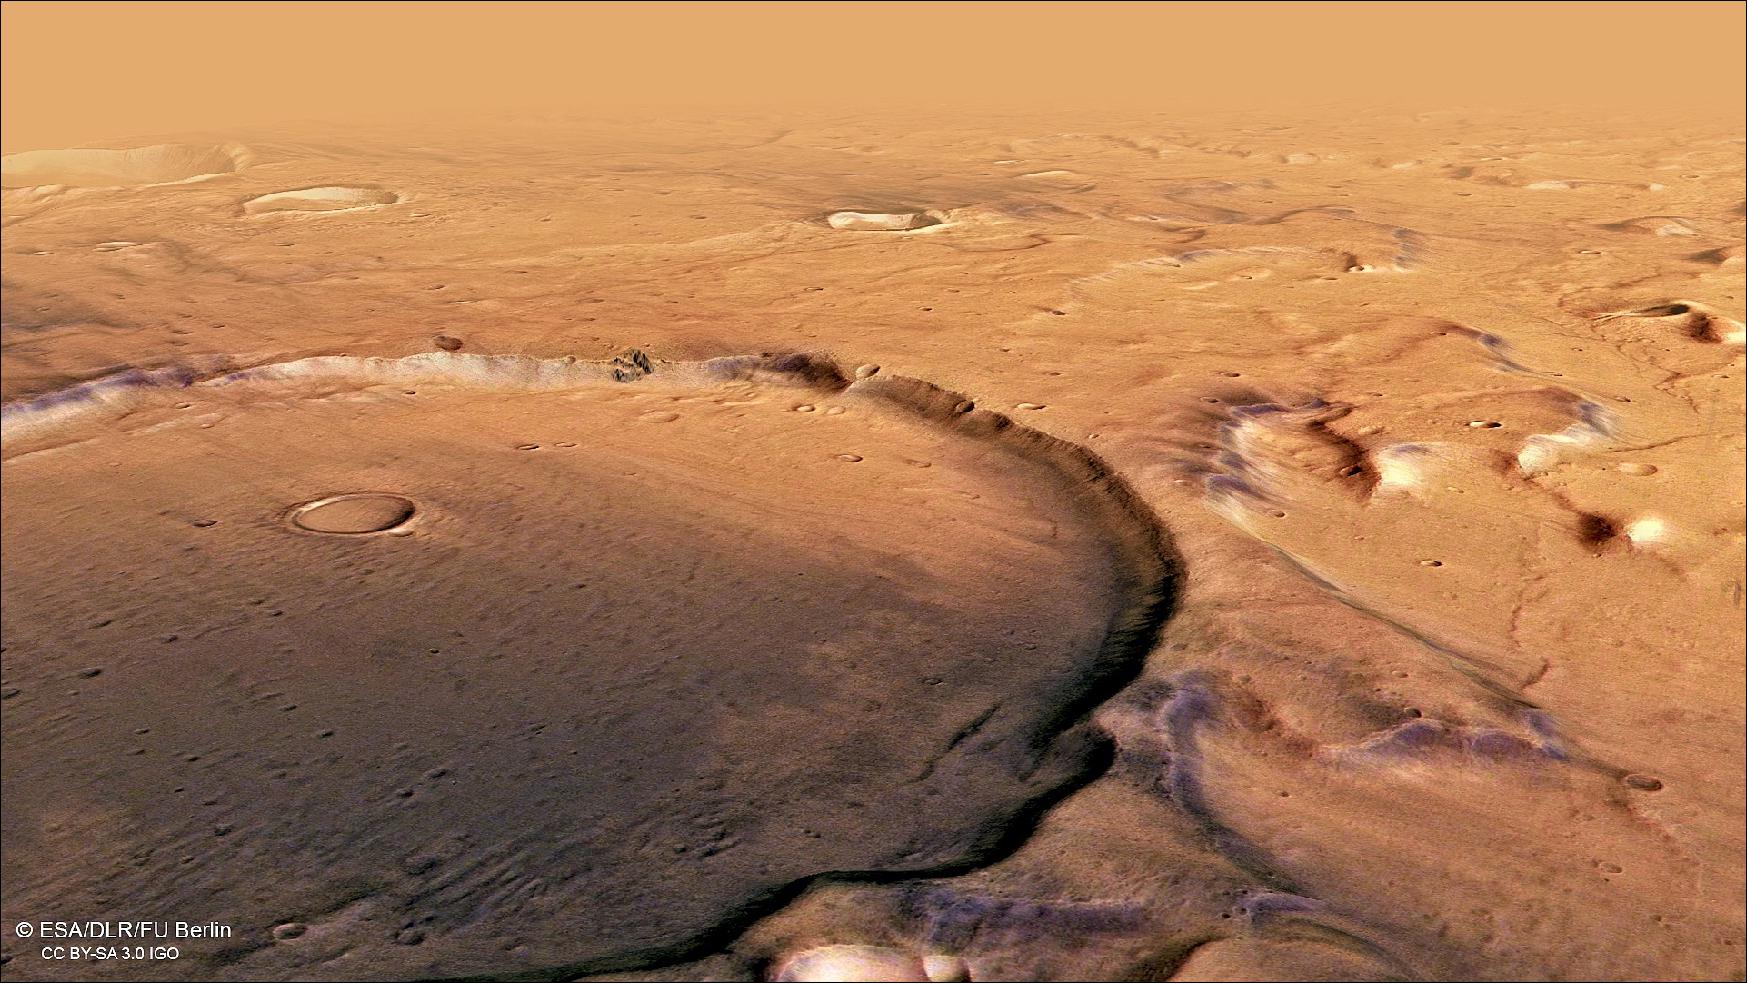 Figure 21: Perspective view of Terra Cimmeria. This image from ESA's Mars Express shows Terra Cimmeria, a region found in the southern highlands of Mars. This oblique perspective view was generated using a digital terrain model and Mars Express data gathered on 11 December 2018 during Mars Express Orbit18904. The ground resolution is approximately 13 meters per pixel and the images are centered at about 171º East and 40º South. This image was created using data from the nadir and color channels of the HRSC. The nadir channel is aligned perpendicular to the surface of Mars, as if looking straight down at the surface (image credit: ESA/DLR/FU Berlin, CC BY-SA 3.0 IGO)